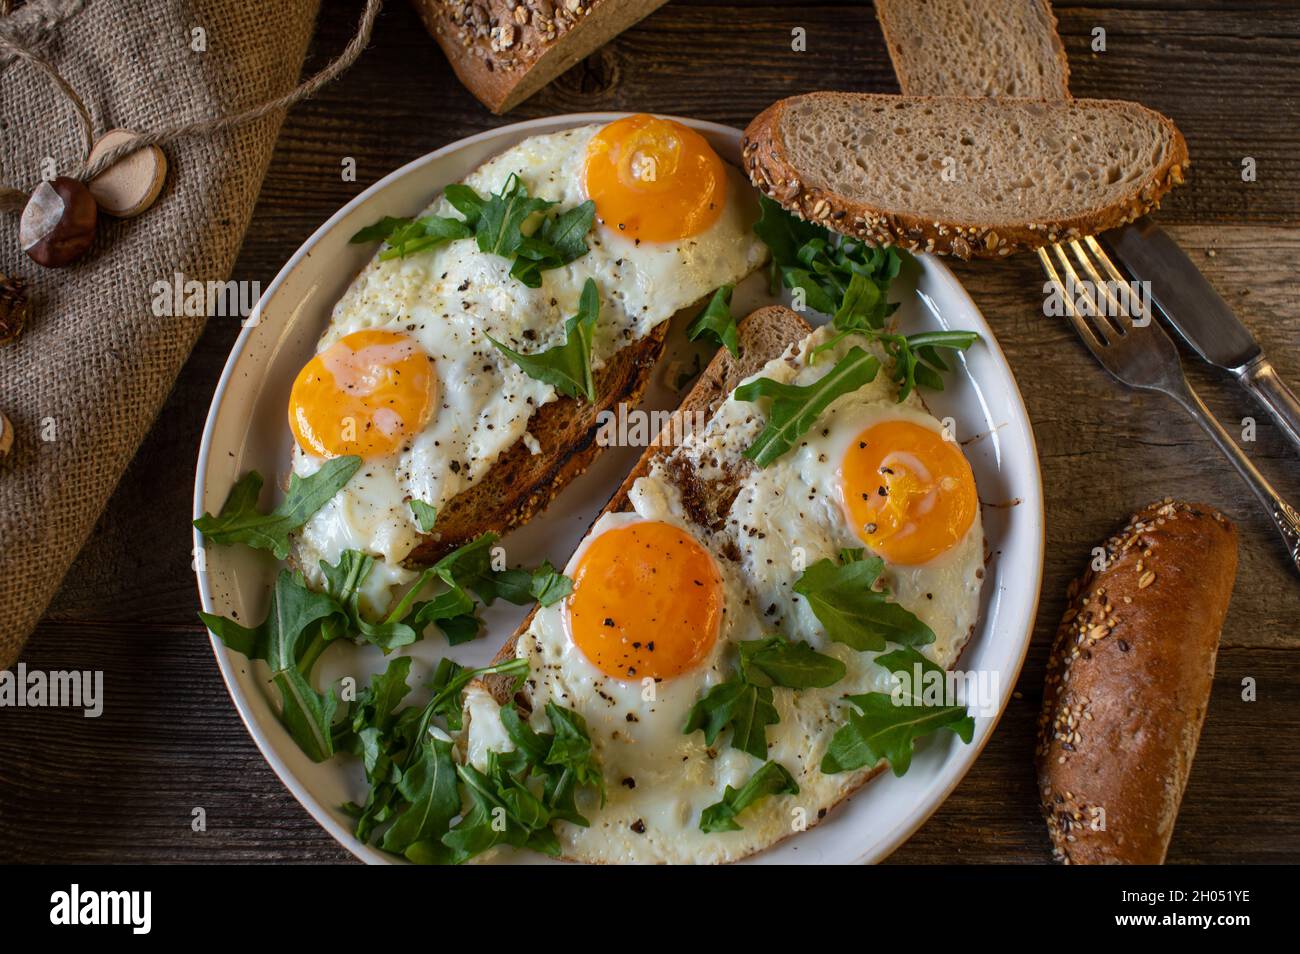 Rustic breakfast with fried eggs, sunny side up, with roasted bread and arugula. Served as a open faced sandwich on a plate on wooden table. Stock Photo